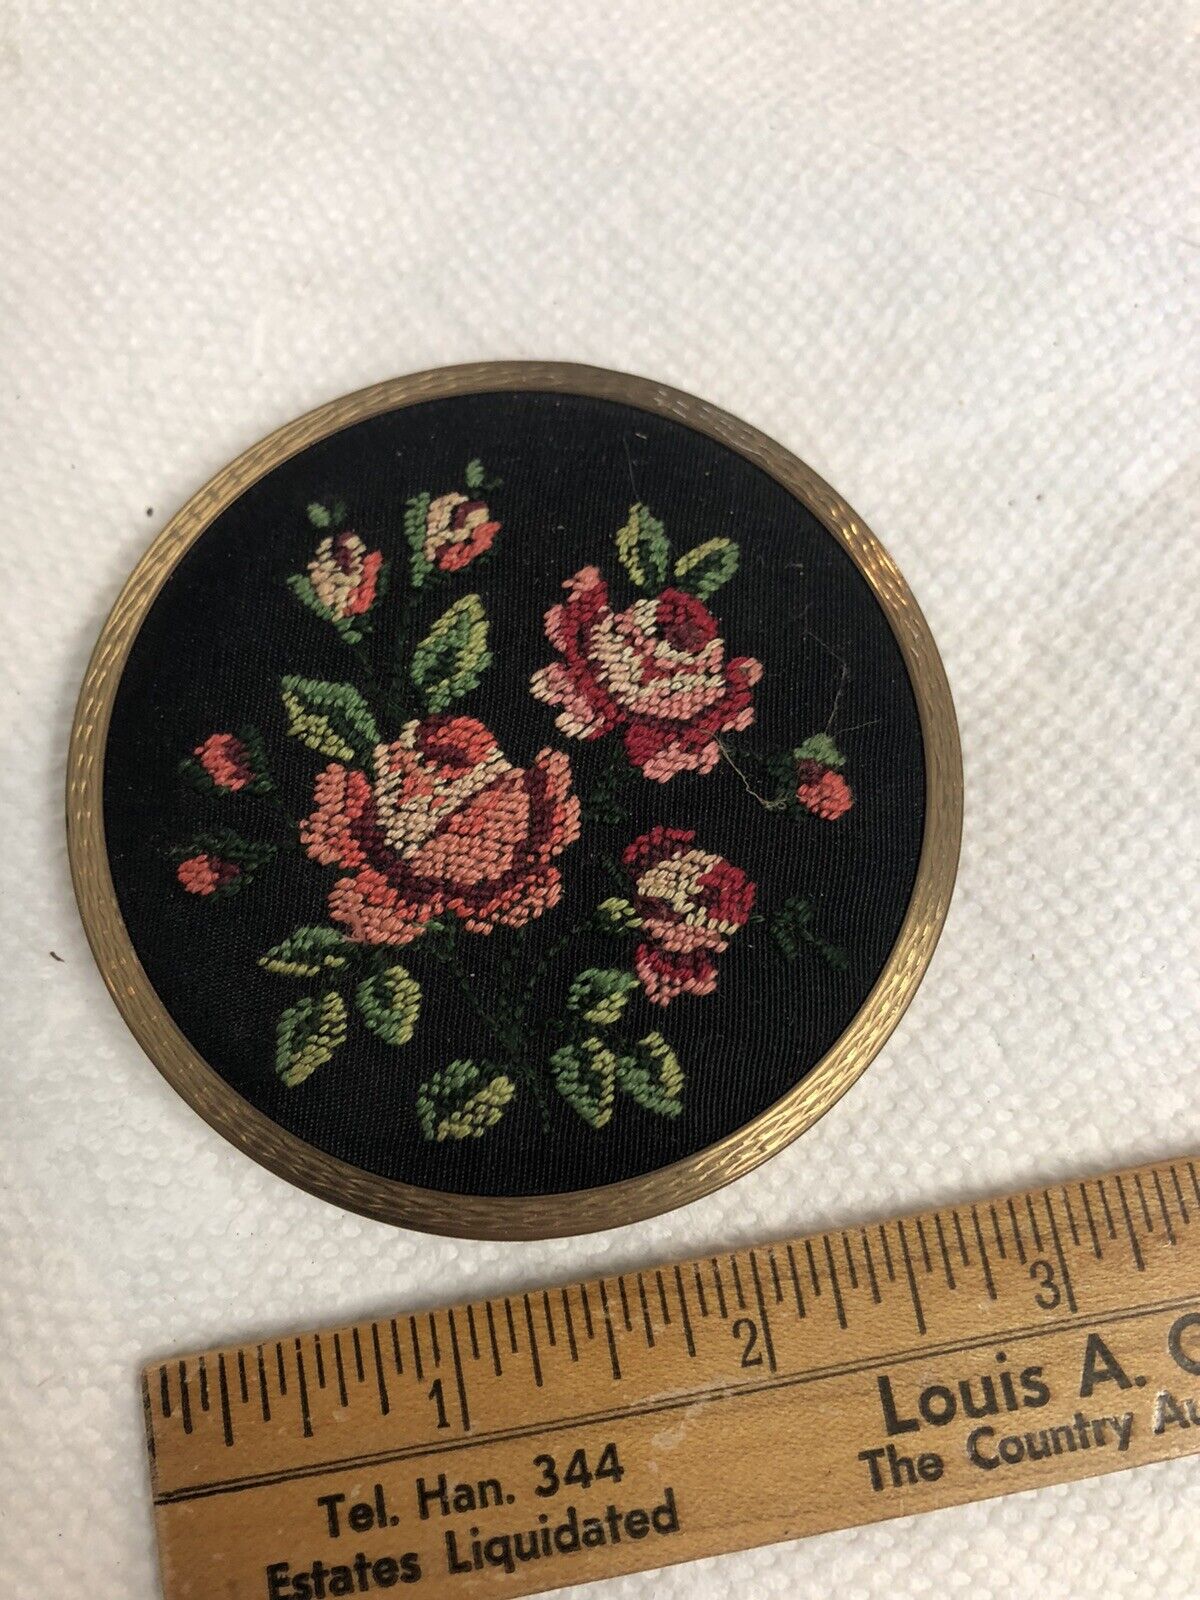 Vintage Stratton England Brass Compact Mirror Beautiful Embroidered Roses